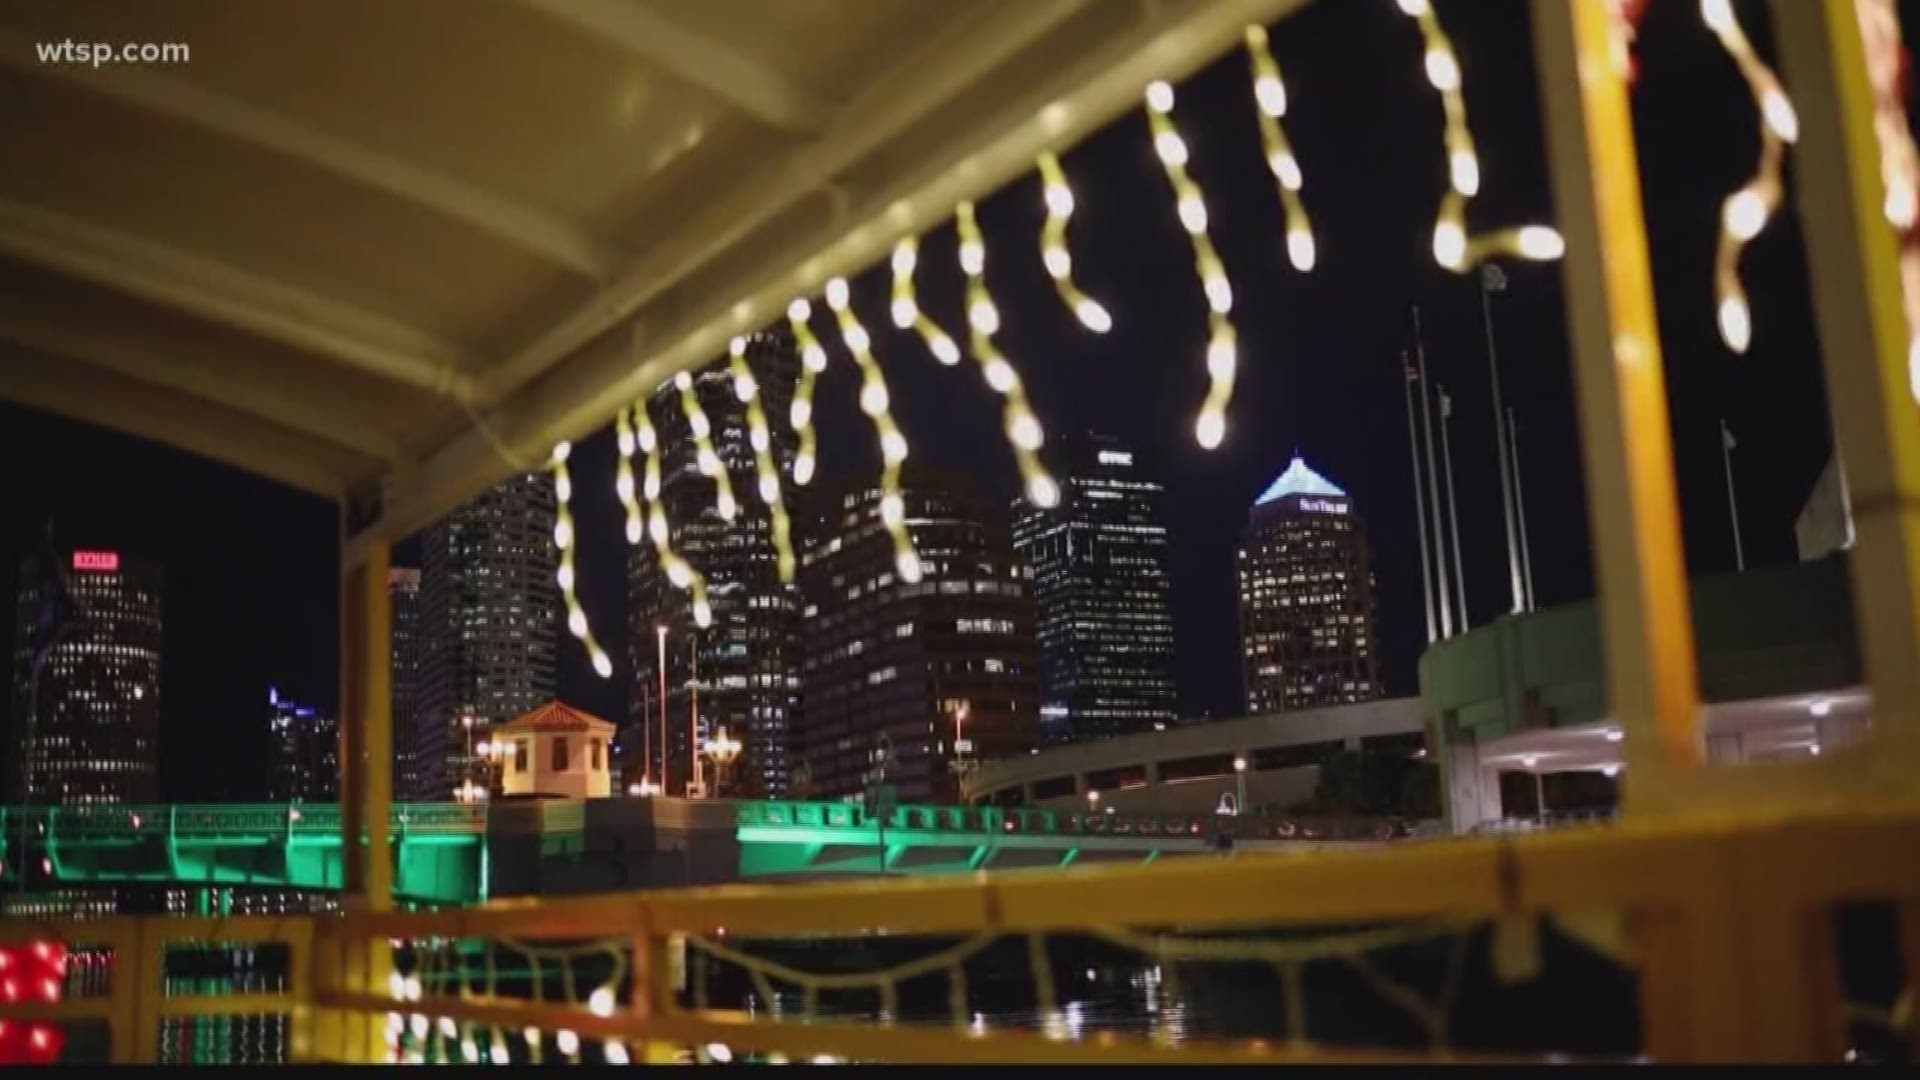 Take a magical winter ride down the Hillsborough River on a water taxi.